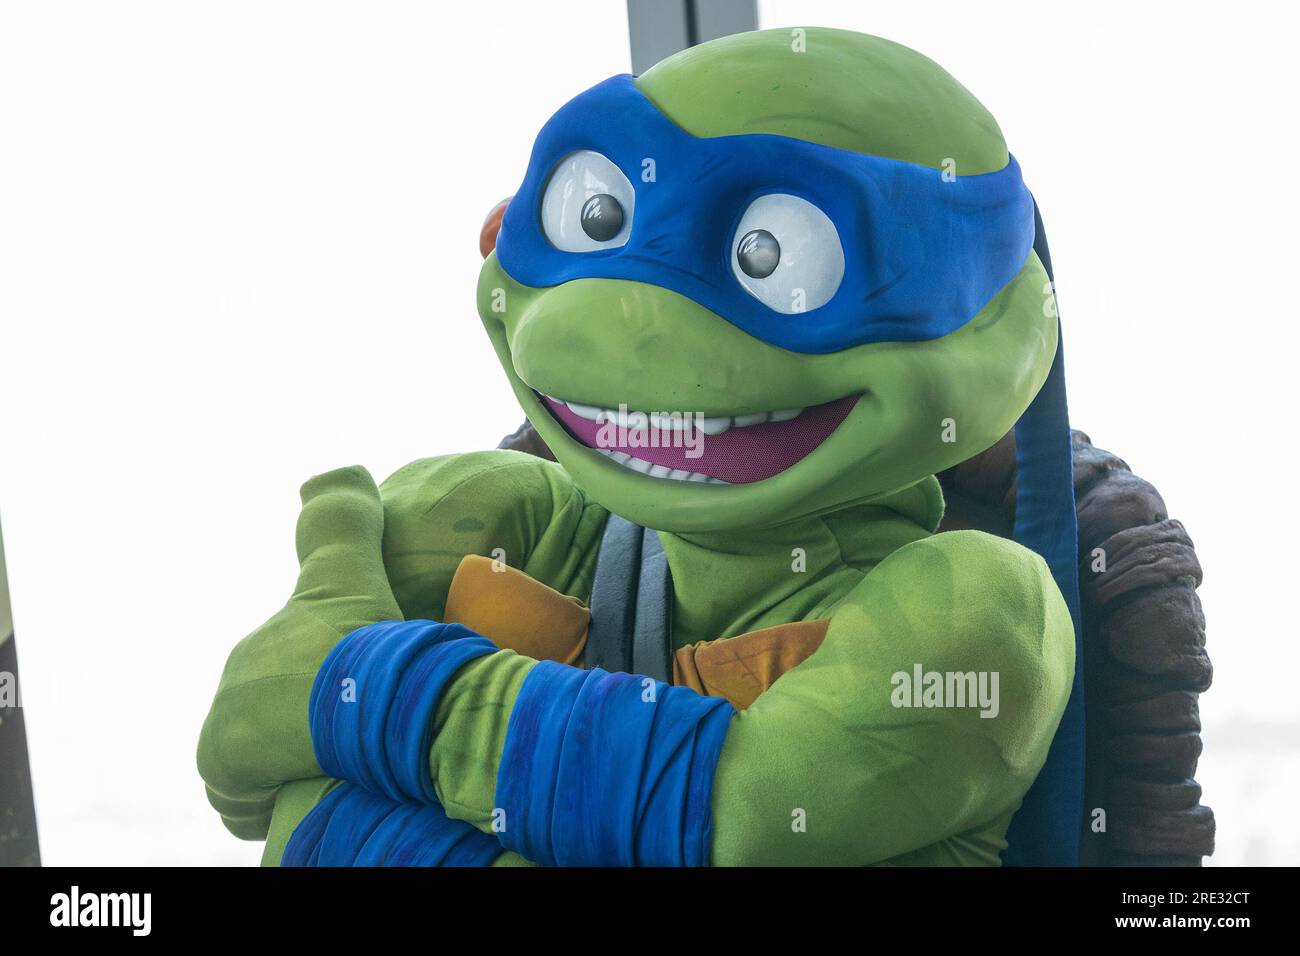 https://c8.alamy.com/comp/2RE32CT/new-york-new-york-usa-24th-july-2023-teenage-mutant-ninja-turtles-character-leonardo-visits-one-world-observatory-in-new-york-all-characters-pose-with-visitors-in-anticipation-of-release-of-teenage-mutant-ninja-turtles-mutant-mayhem-blockbuster-movie-is-scheduled-for-release-on-august-2-2023-credit-image-lev-radinpacific-press-via-zuma-press-wire-editorial-usage-only!-not-for-commercial-usage!-credit-zuma-press-incalamy-live-news-2RE32CT.jpg